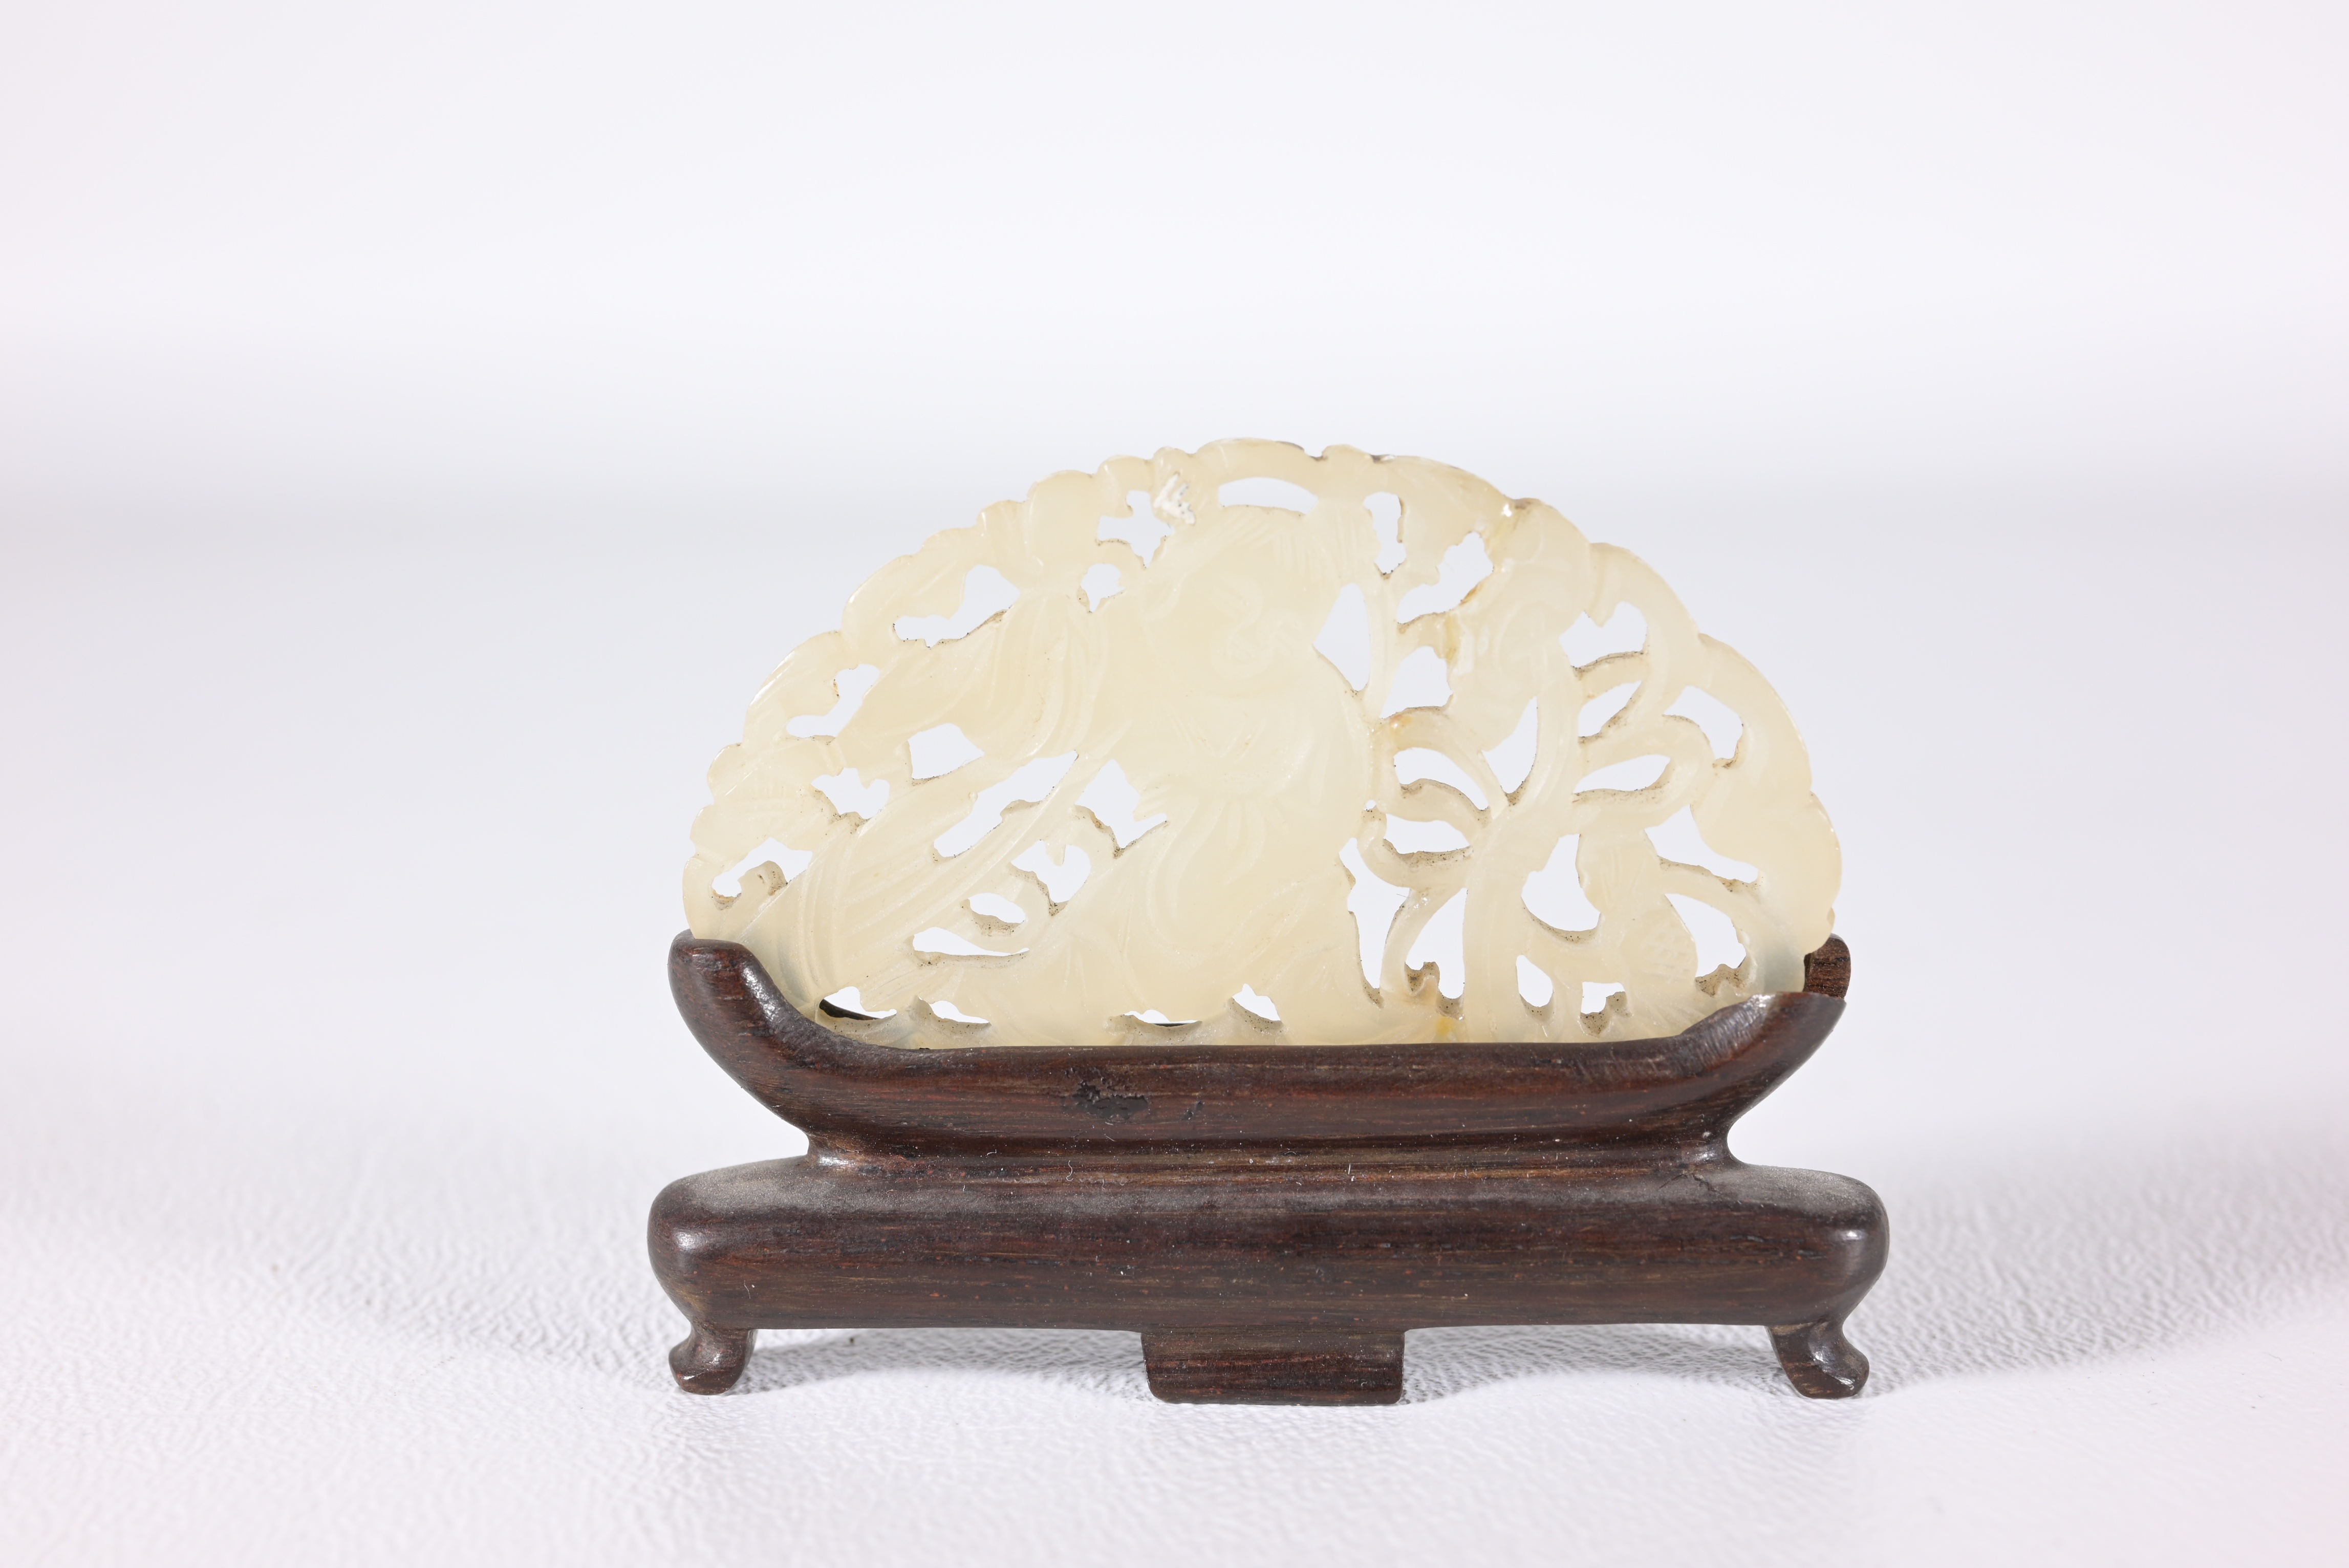 Antique Carved/Reticulated White Jade on Stand - Image 2 of 4